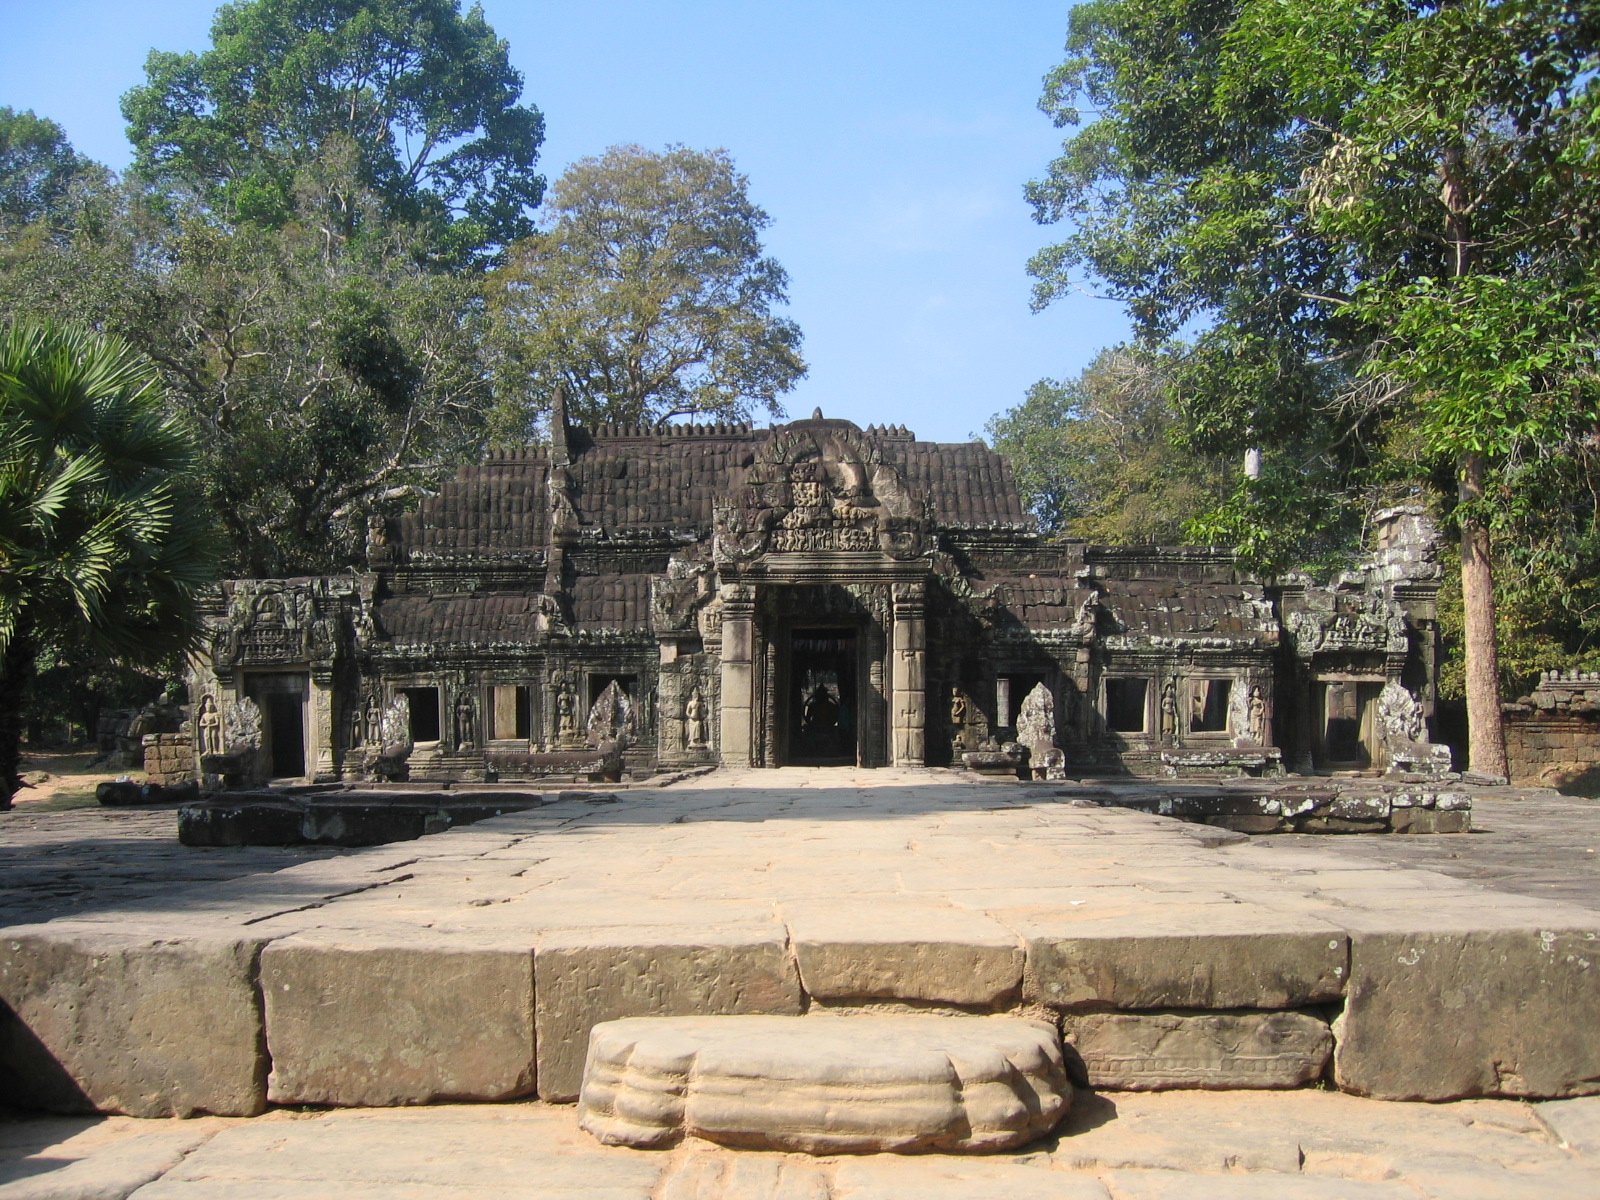 Stone carvings at Banteay Kdei temple depicting Hindu and Buddhist deities